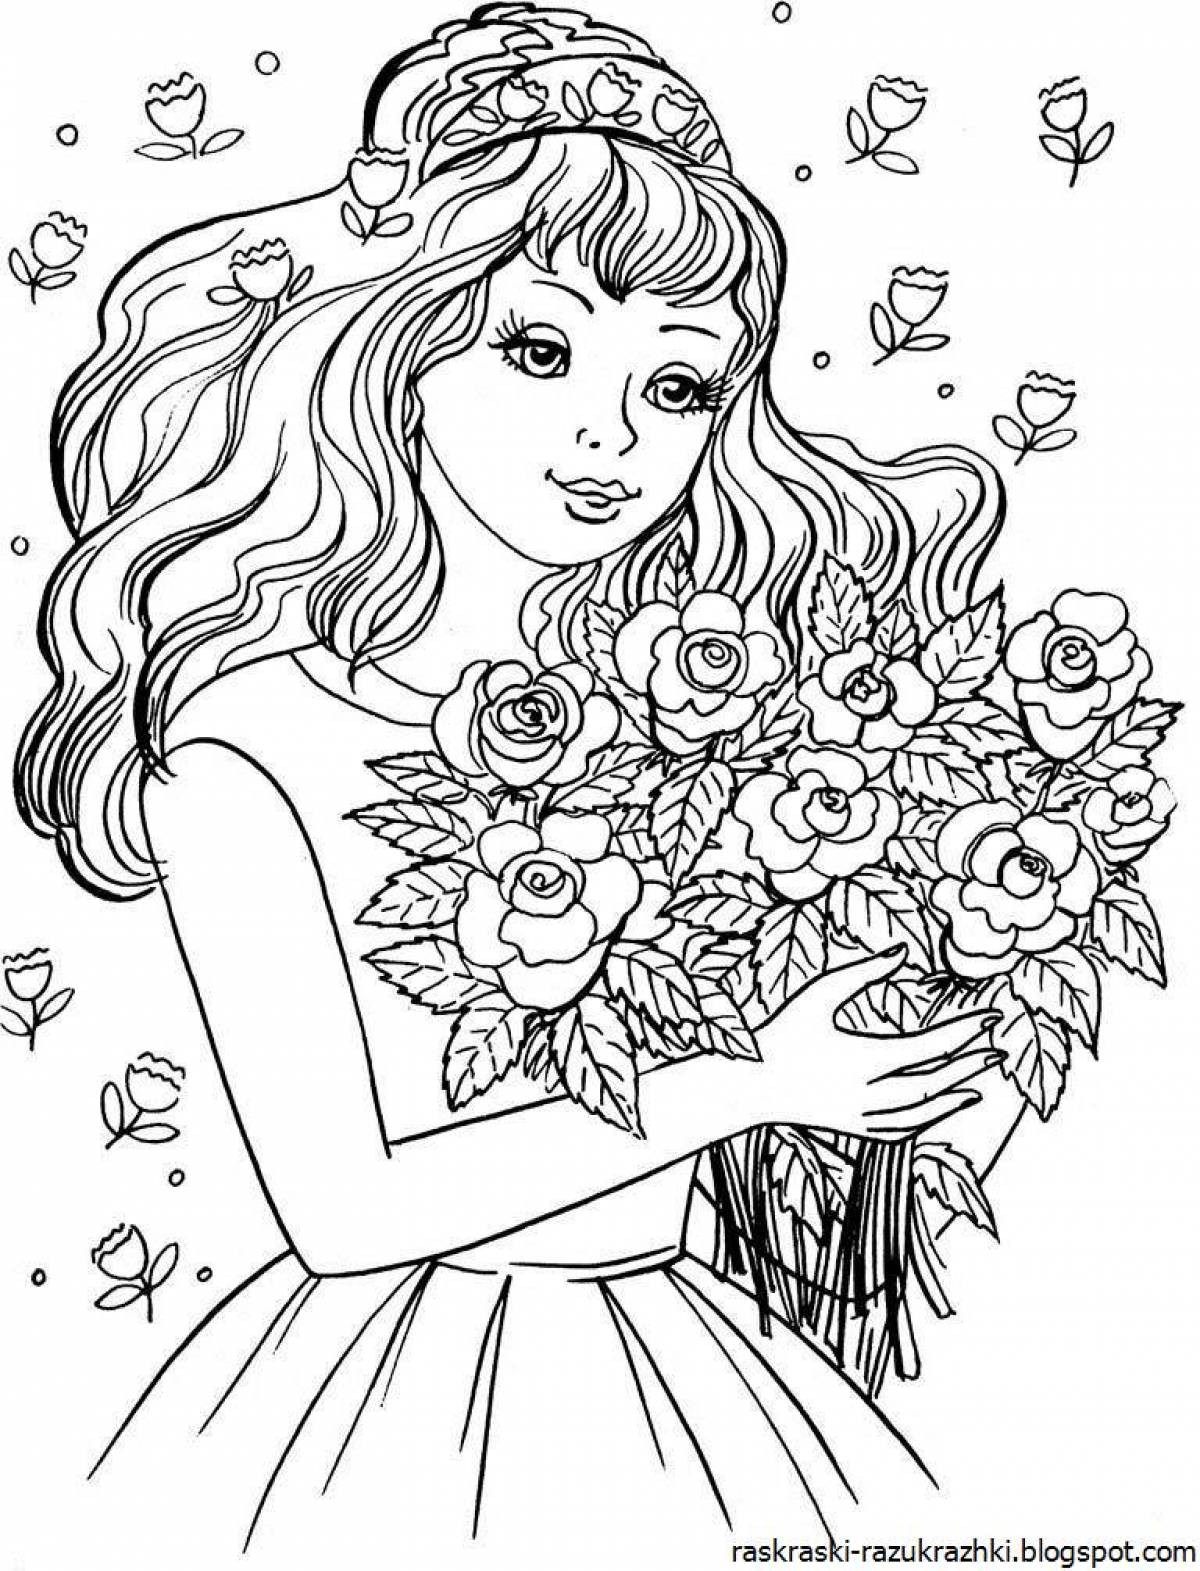 Very cute serene coloring book for girls